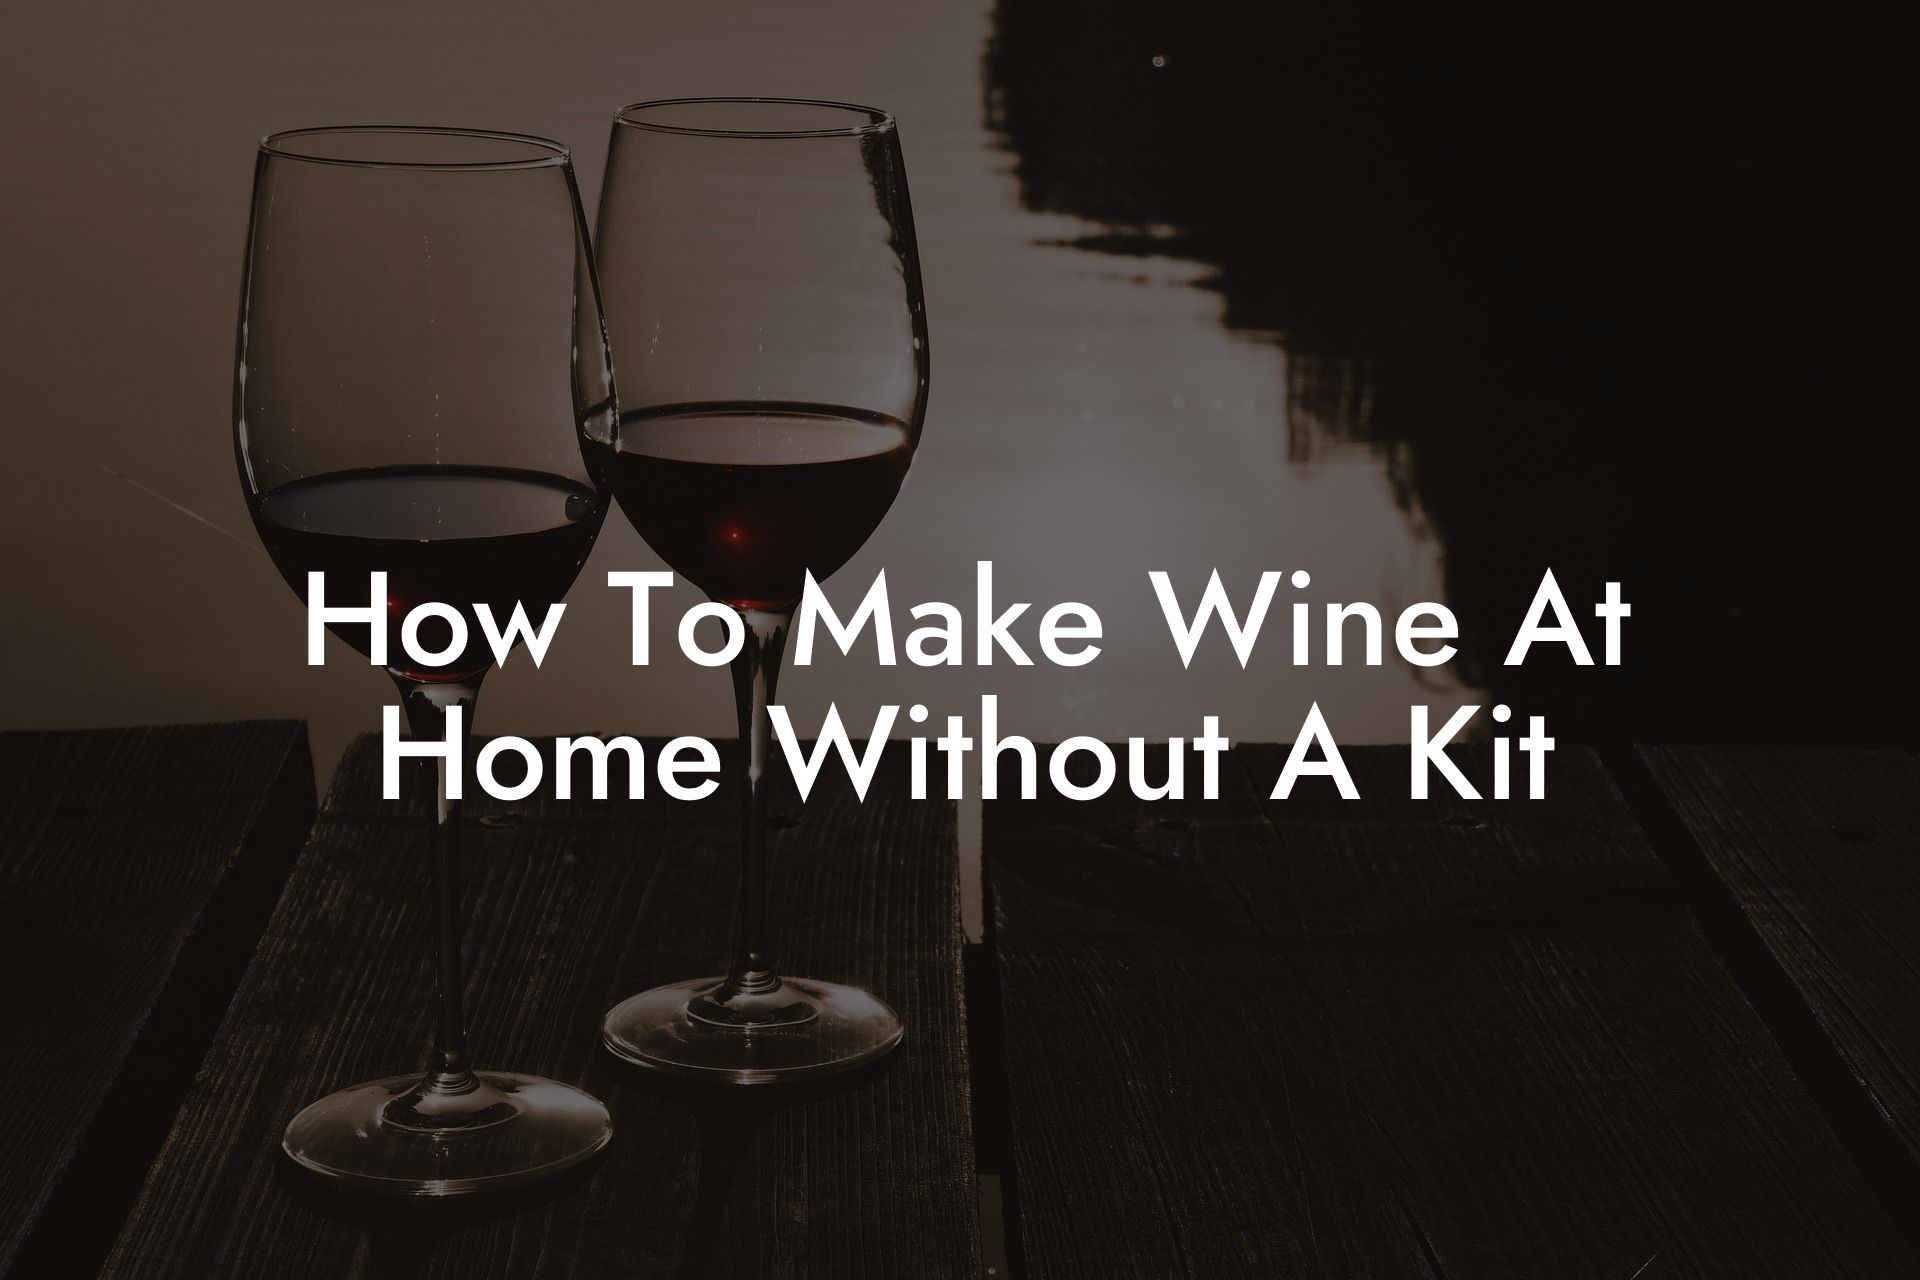 How To Make Wine At Home Without A Kit